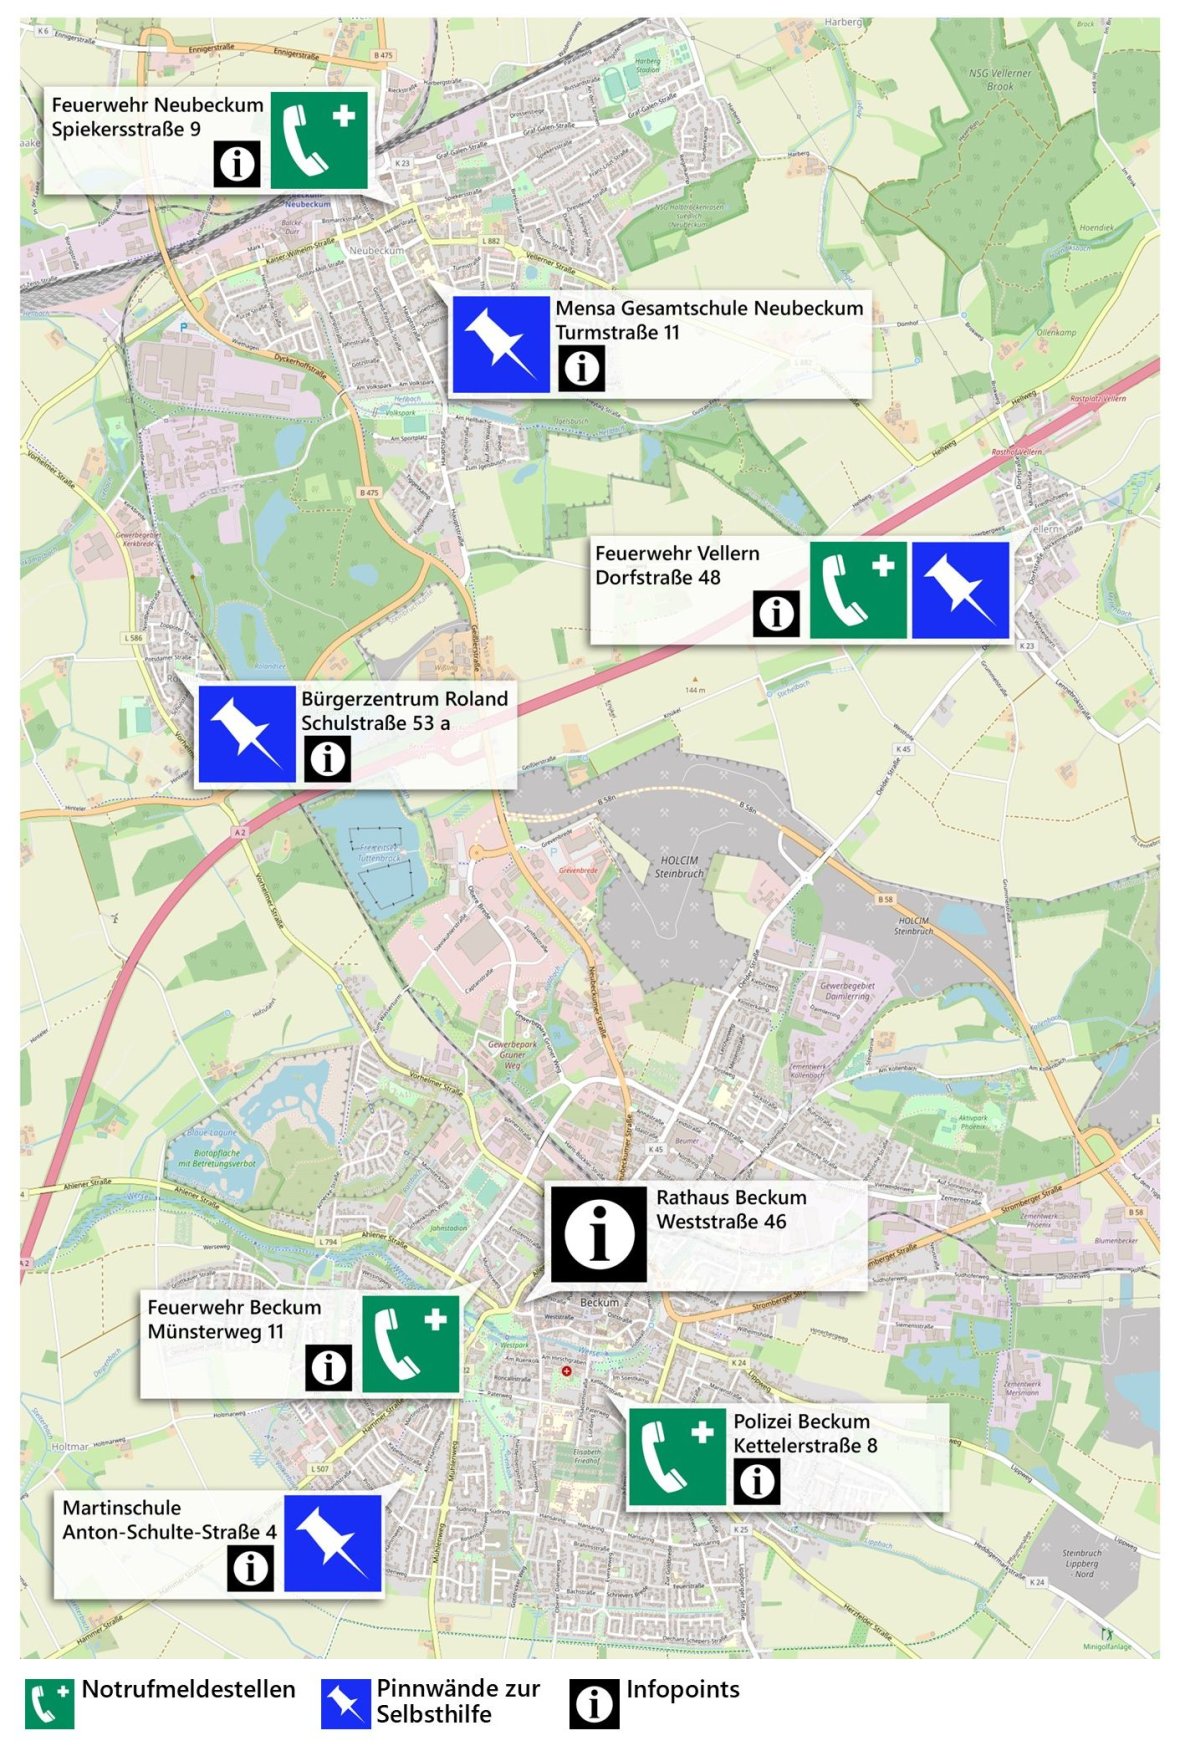 Map with contact points in an emergency